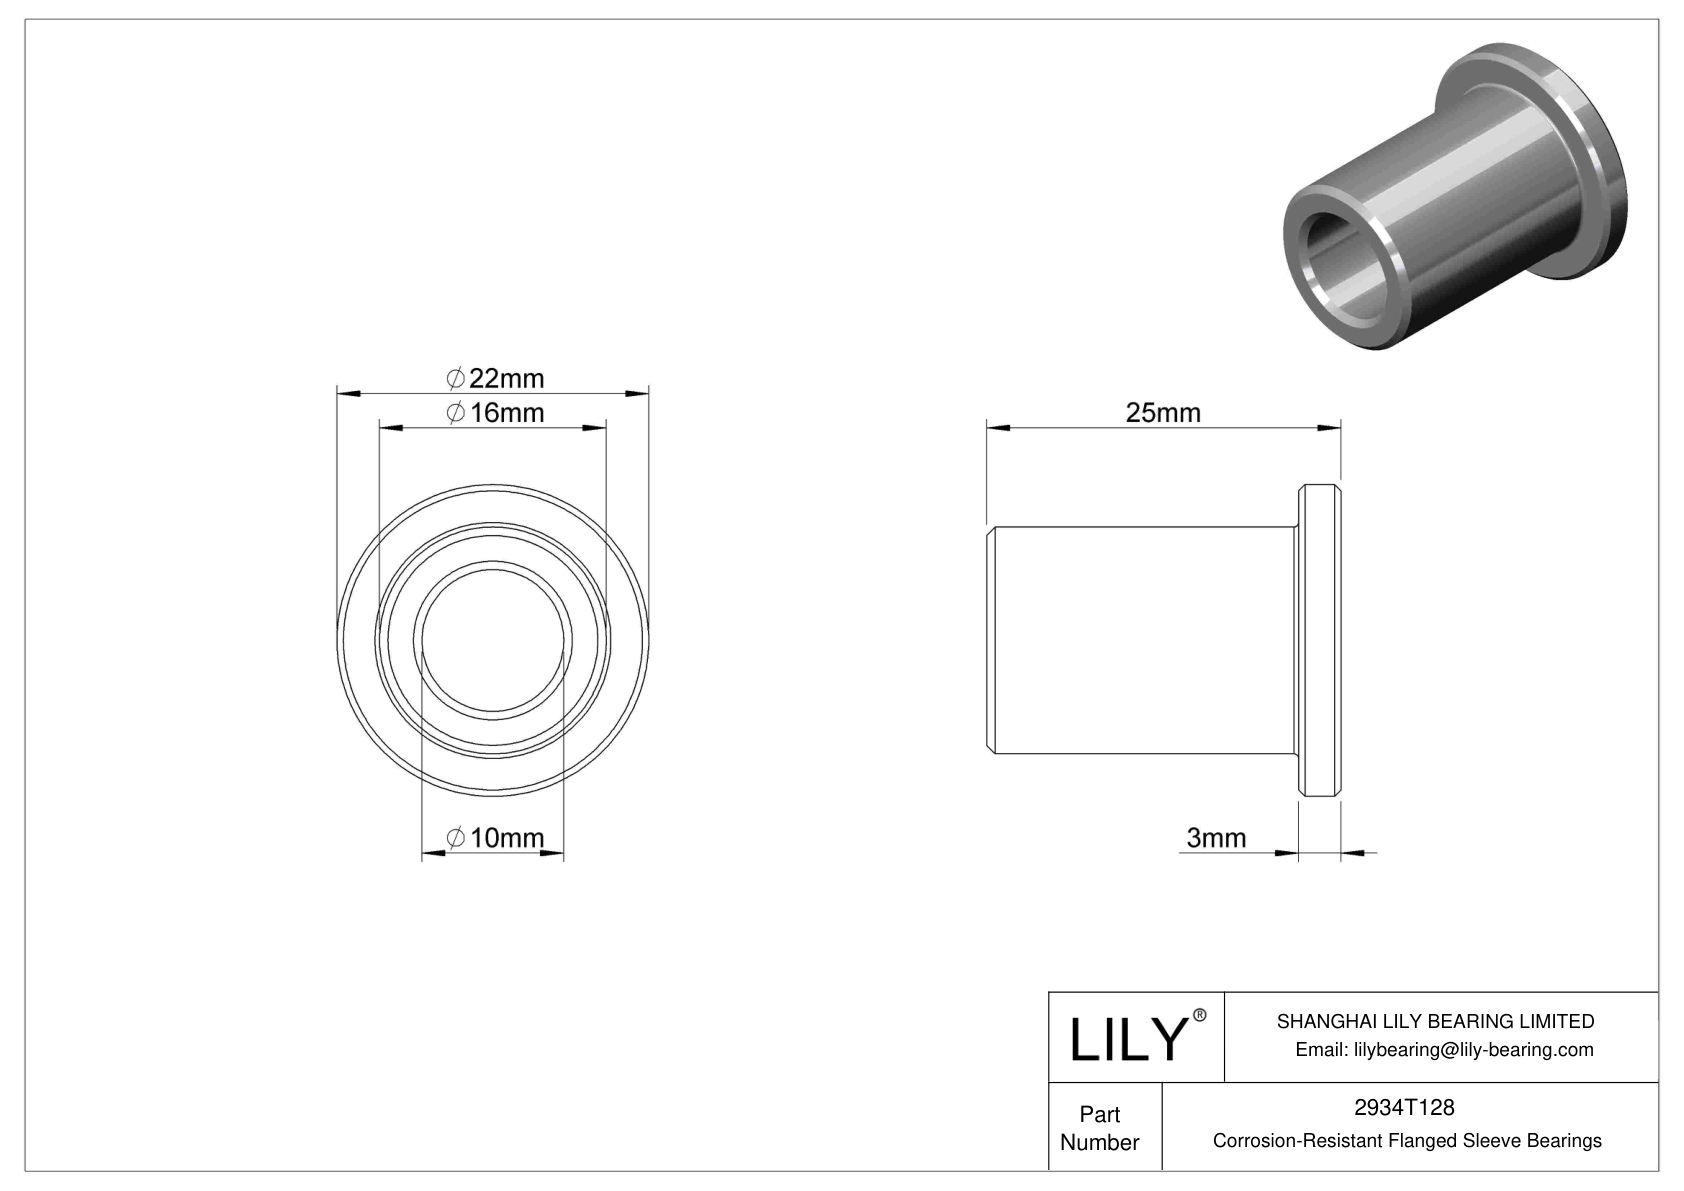 CJDETBCI Corrosion-Resistant Flanged Sleeve Bearings cad drawing